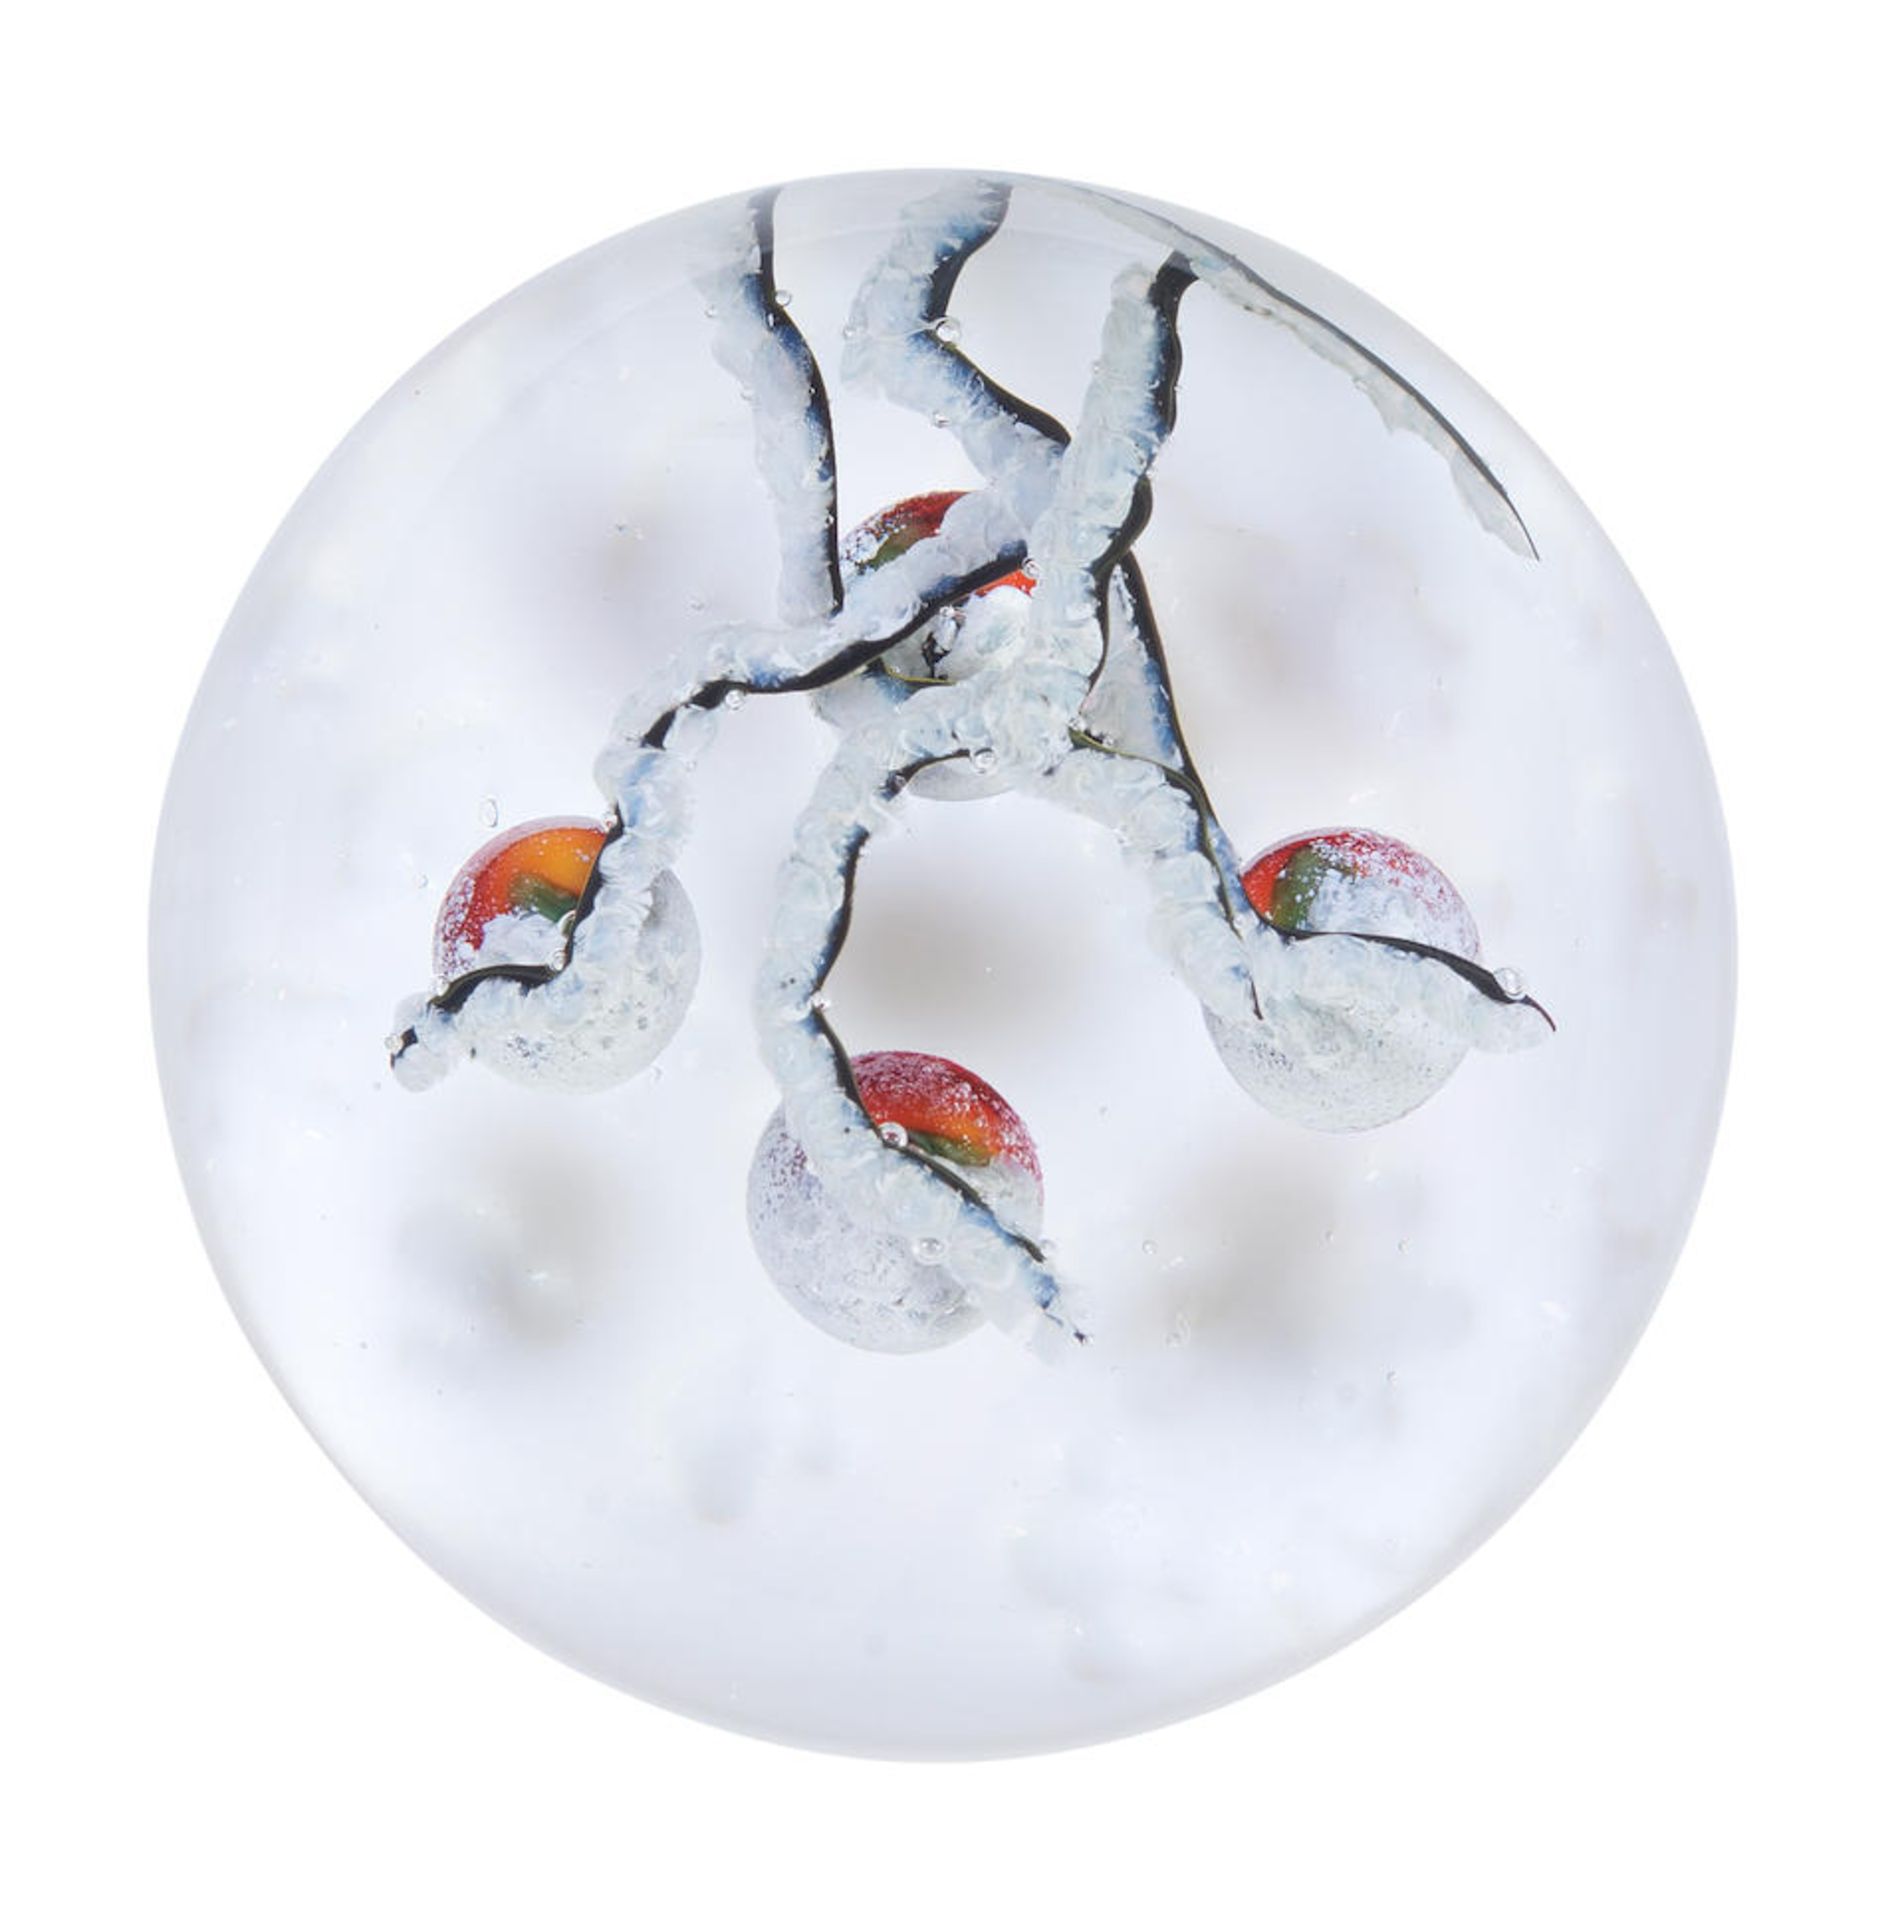 A Lundberg Studios 'First Snow in Kyoto' paperweight by Daniel Salazar, dated 2003